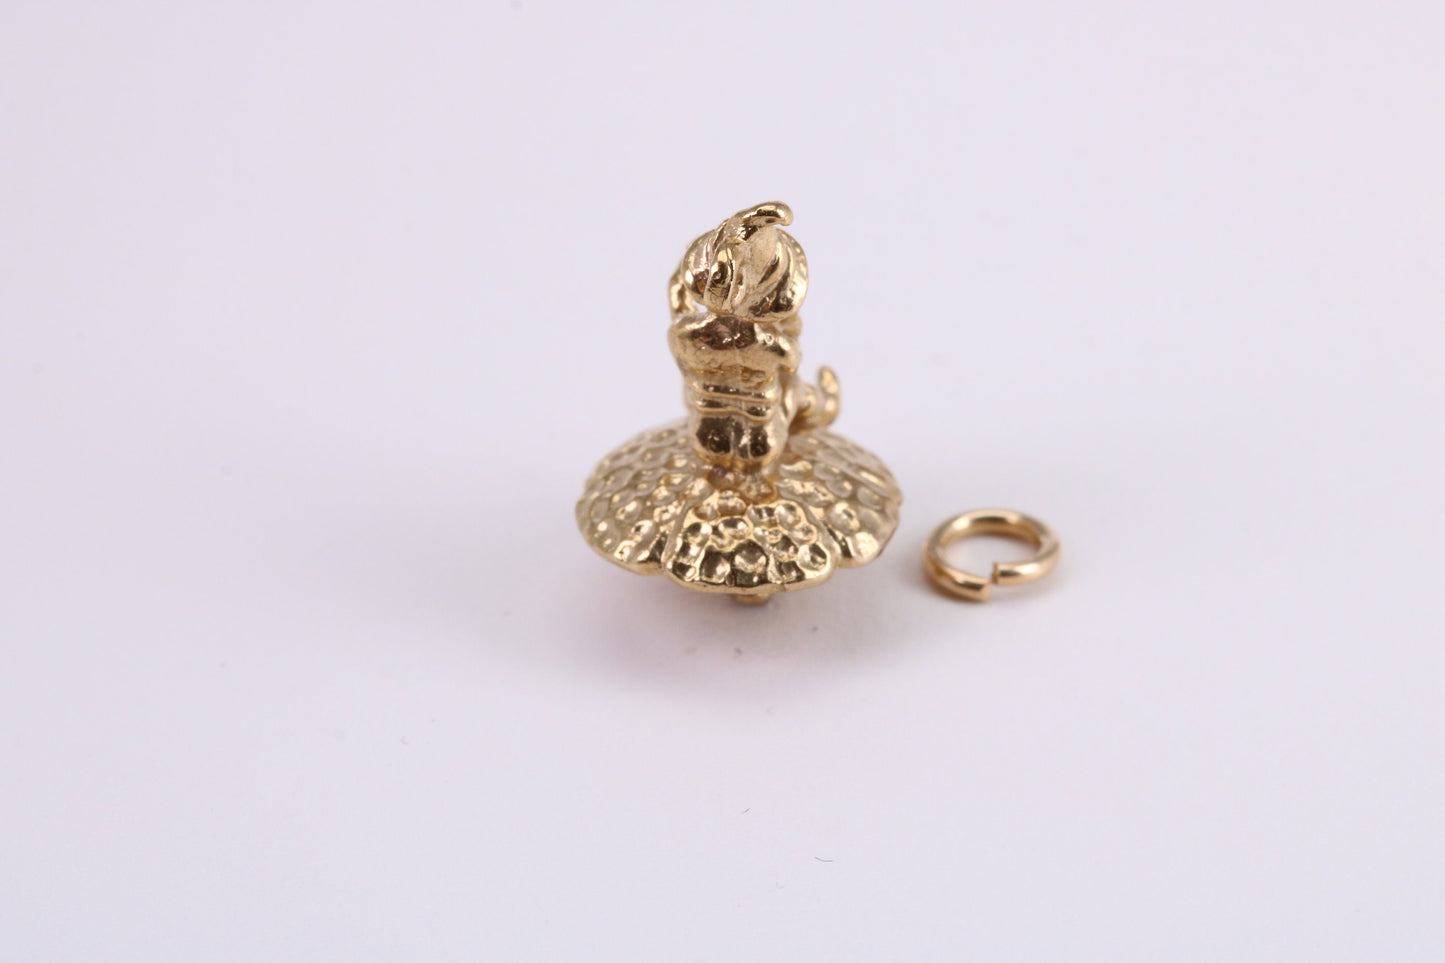 Gnome on Toadstool Charm, Traditional Charm, Made from Solid Yellow Gold, Complete with Attachment Link